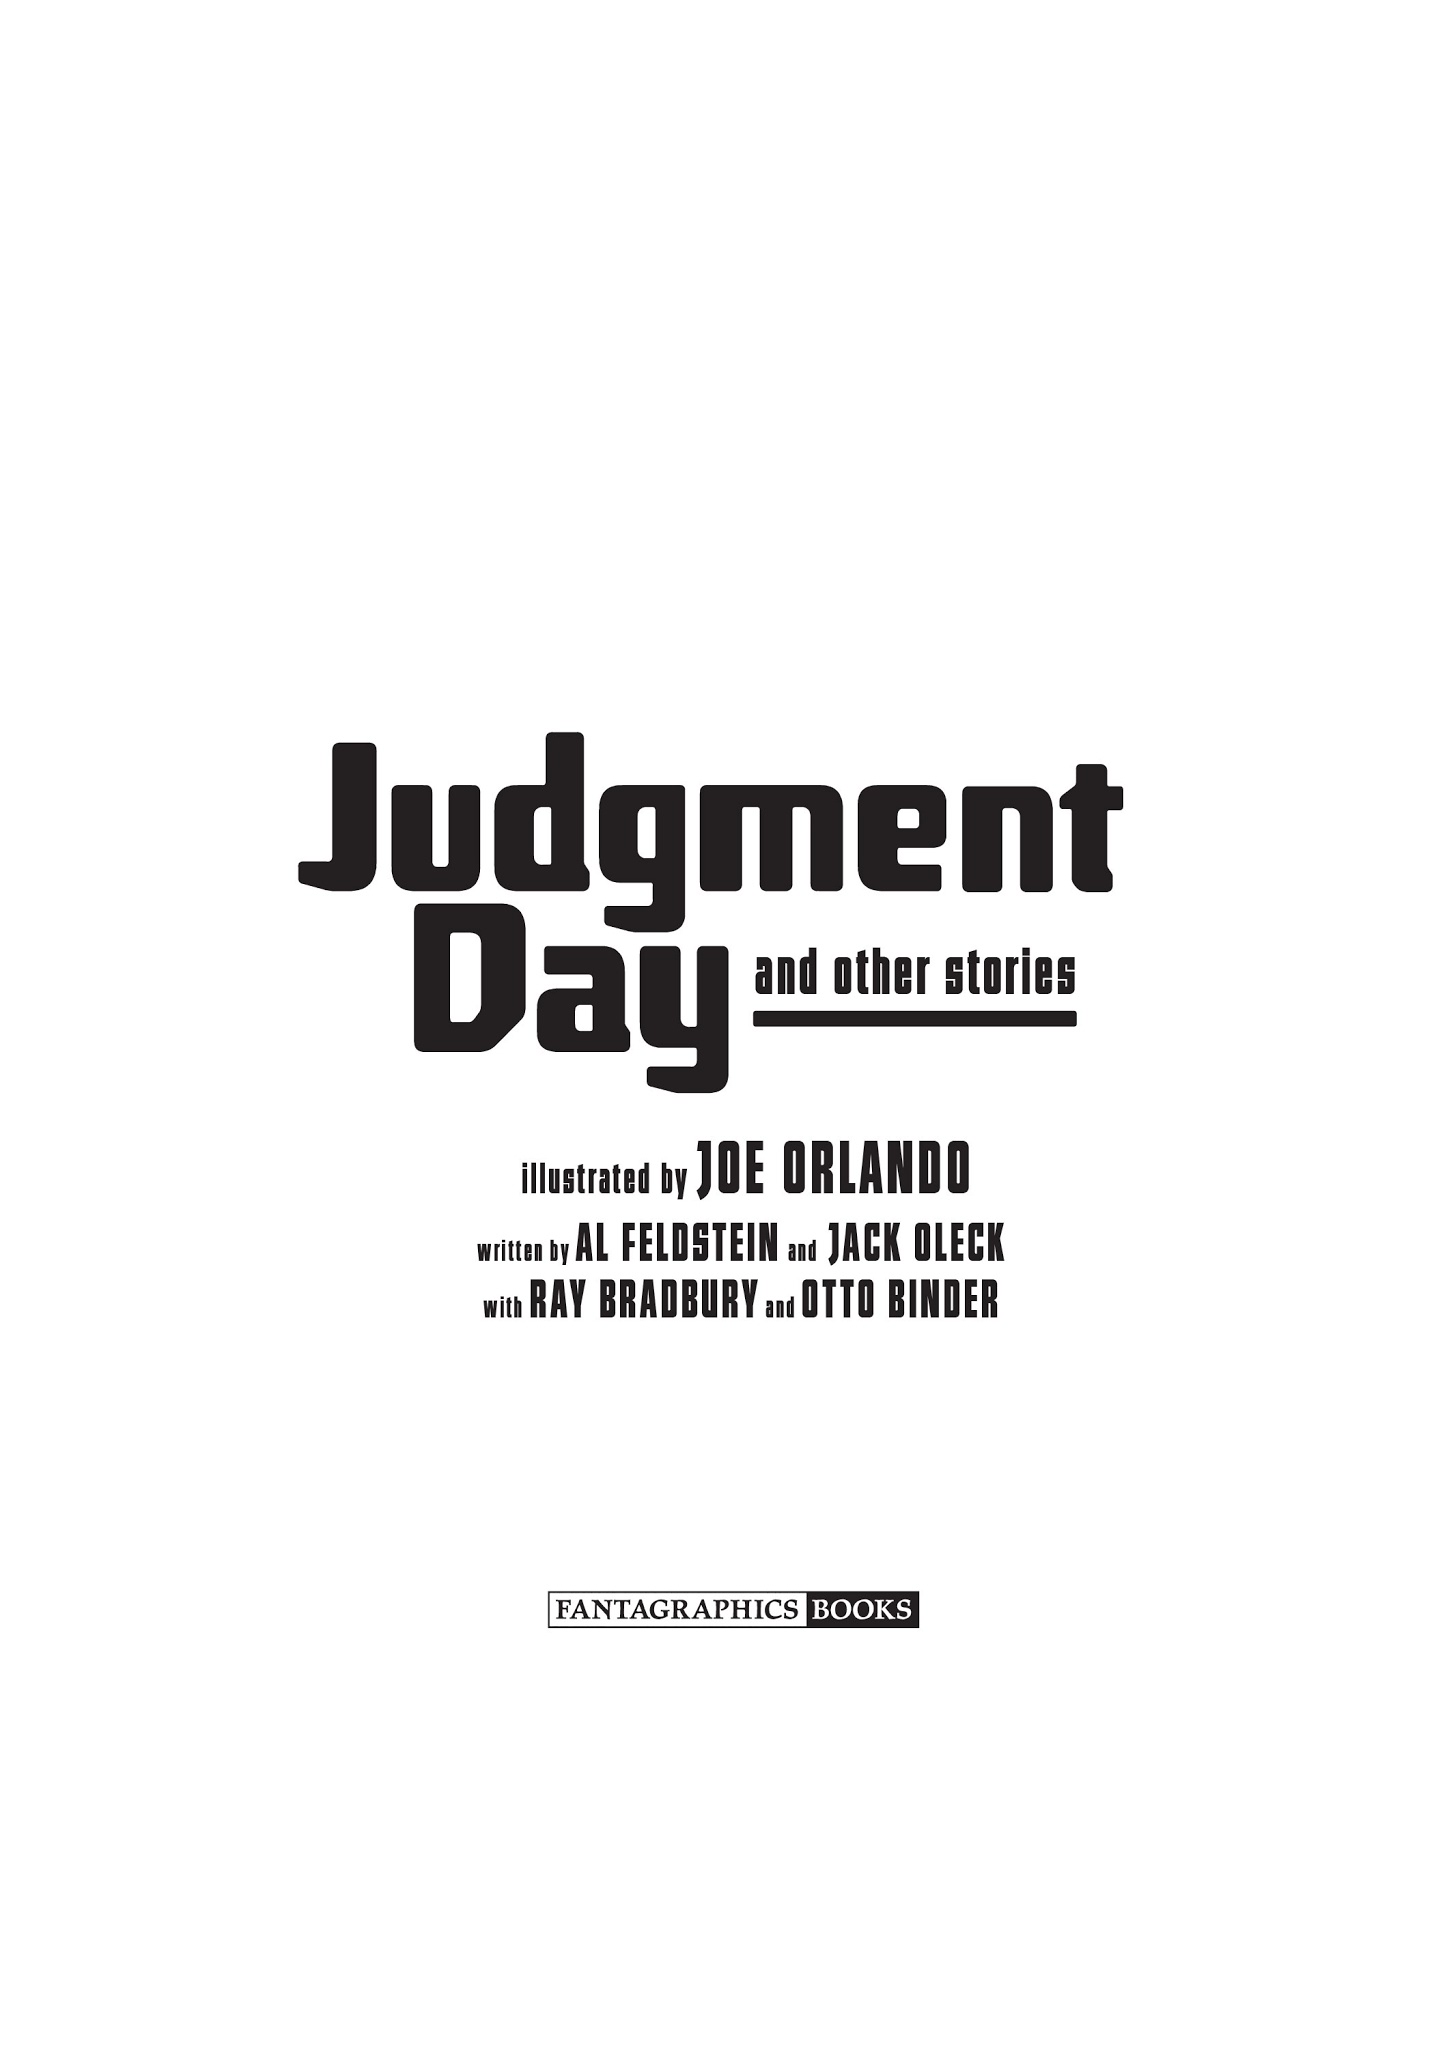 Read online Judgment Day and Other Stories comic -  Issue # TPB - 4